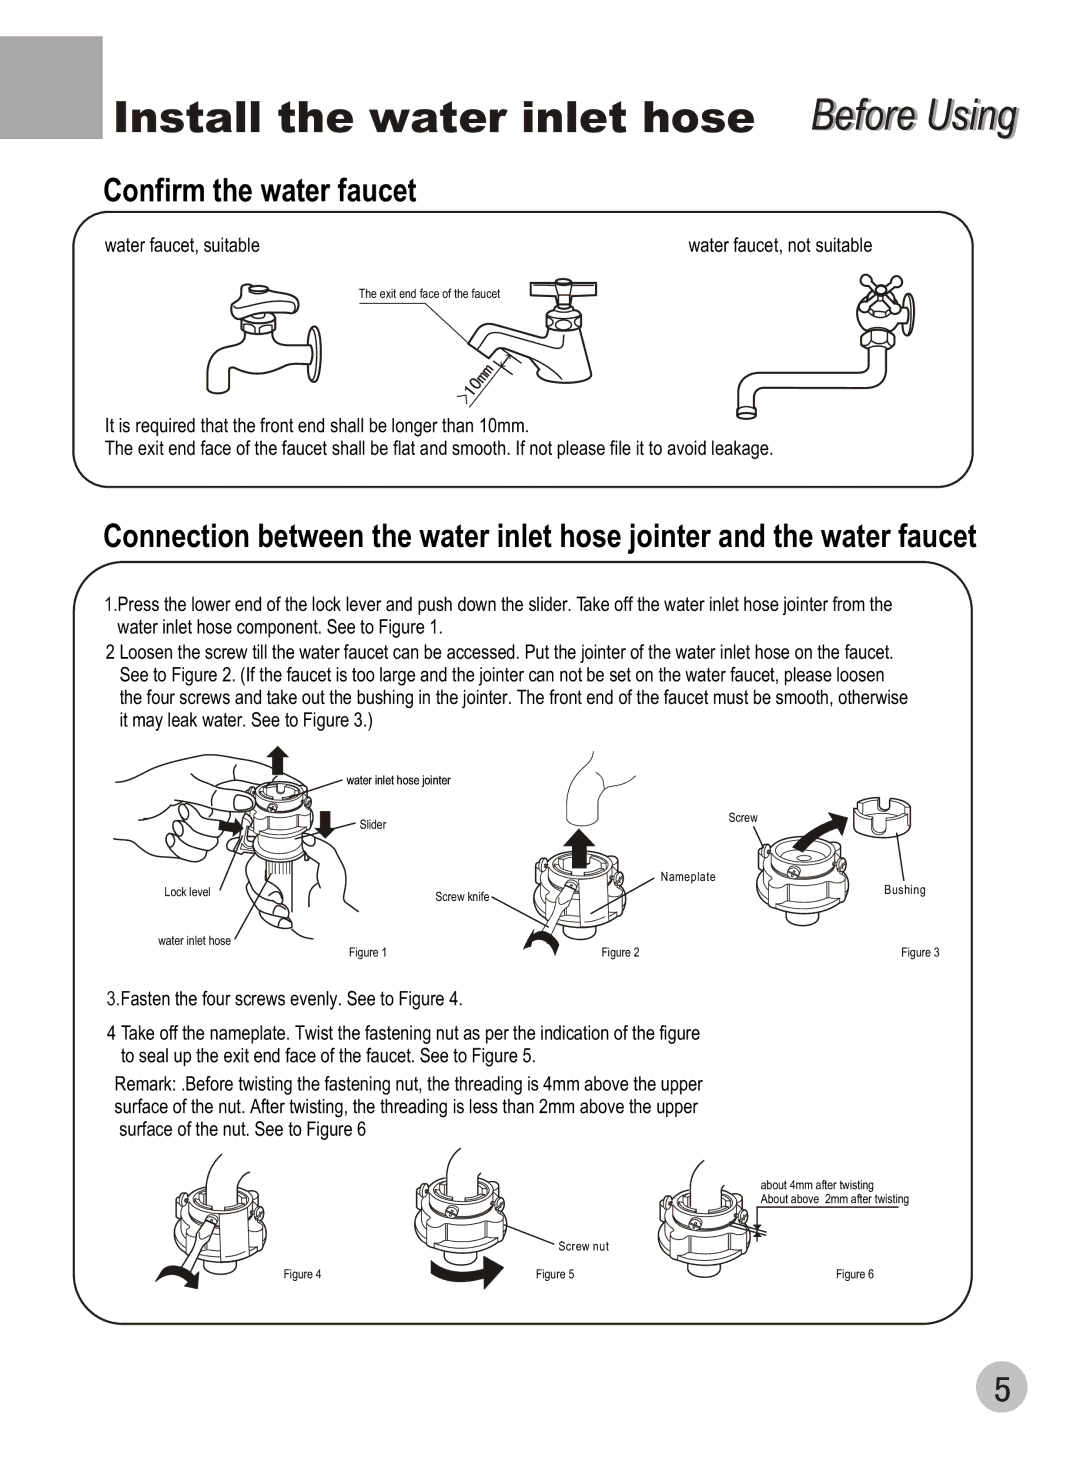 Haier DWE-3120A user manual Install the water inlet hose Before Usingi, Confirm the water faucet 